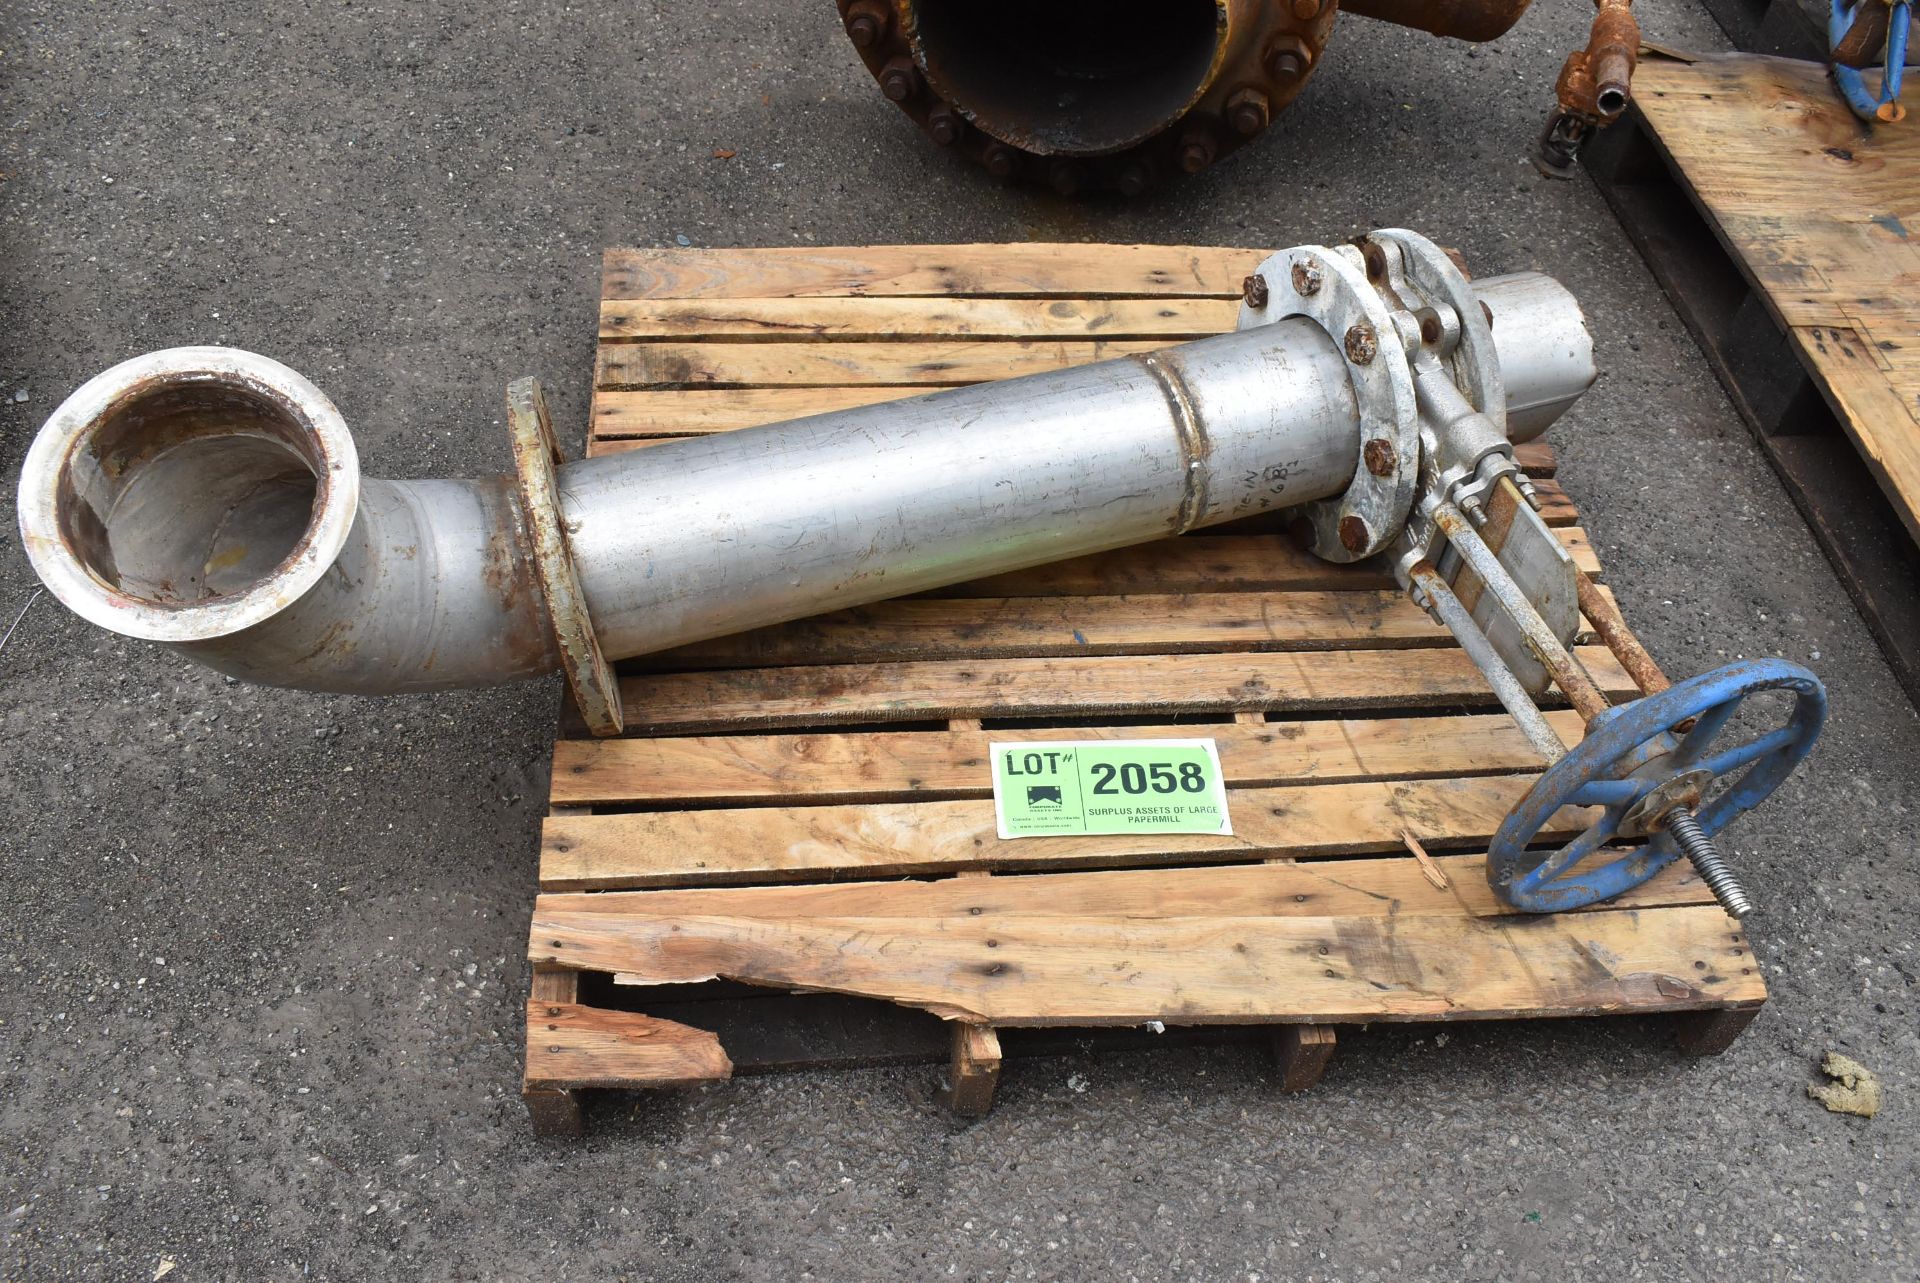 LOT/ TRUELINE 6" KNIFE VALVE WITH PIPING [RIGGING FEE FOR LOT #2058 - $25 USD PLUS APPLICABLE